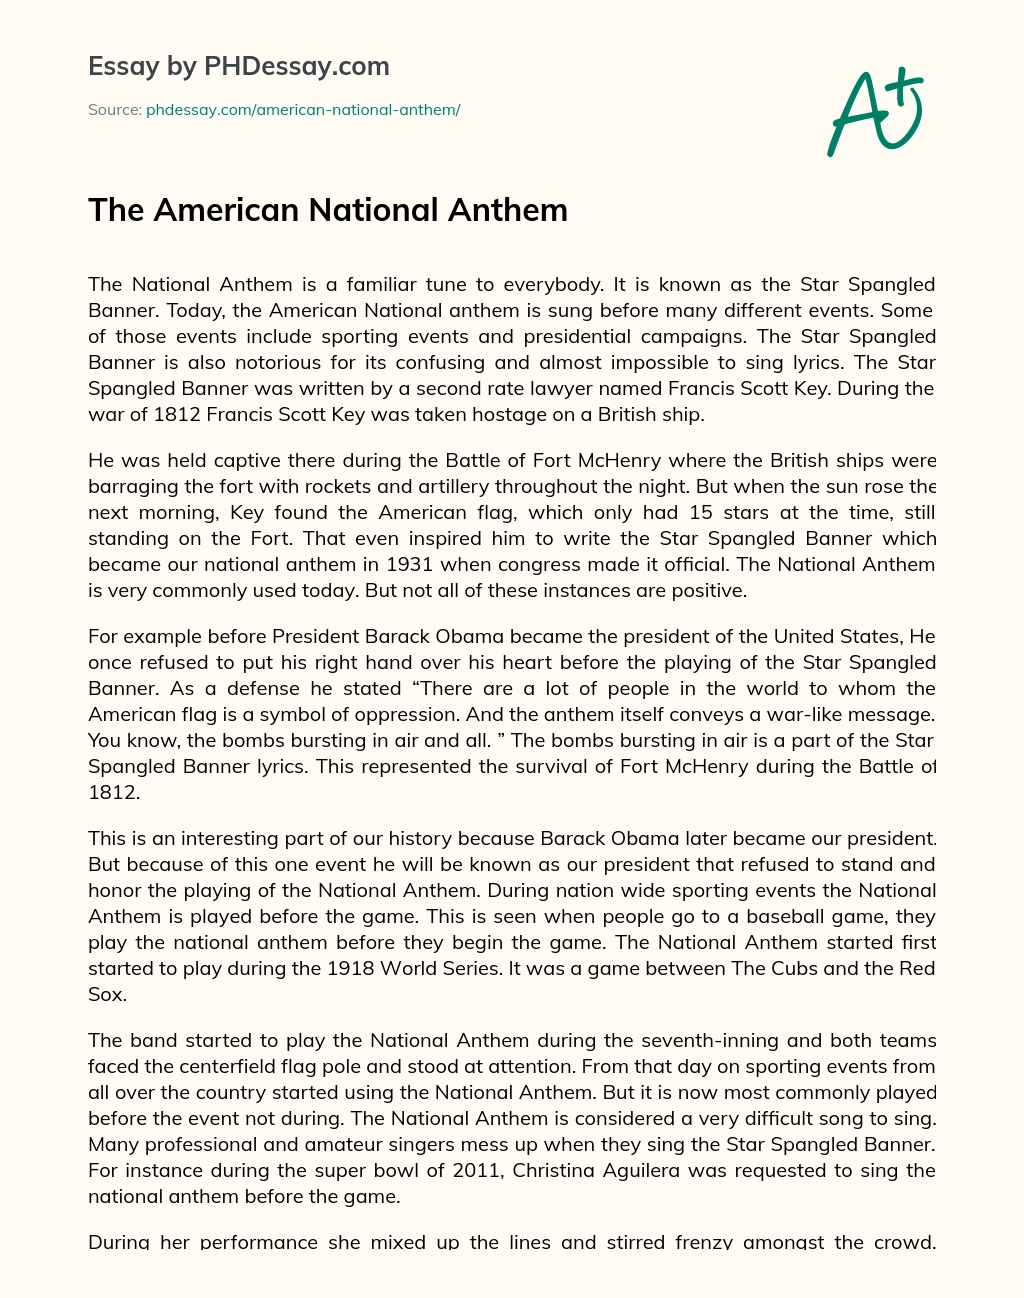 The American National Anthem essay